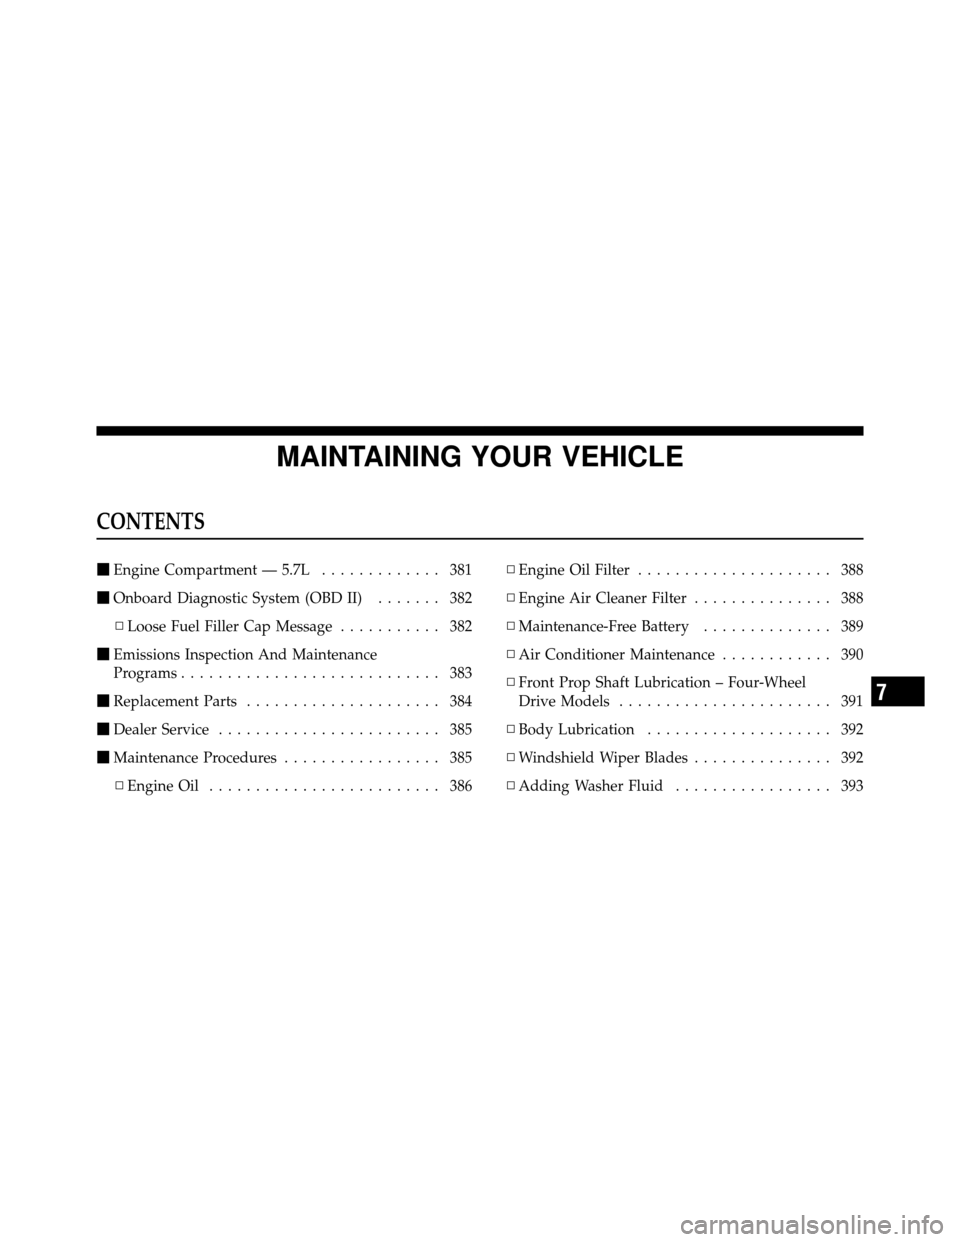 Ram 5500 Chassis Cab 2011 User Guide MAINTAINING YOUR VEHICLE
CONTENTS
Engine Compartment — 5.7L ............. 381
 Onboard Diagnostic System (OBD II) ....... 382
▫ Loose Fuel Filler Cap Message ........... 382
 Emissions Inspecti